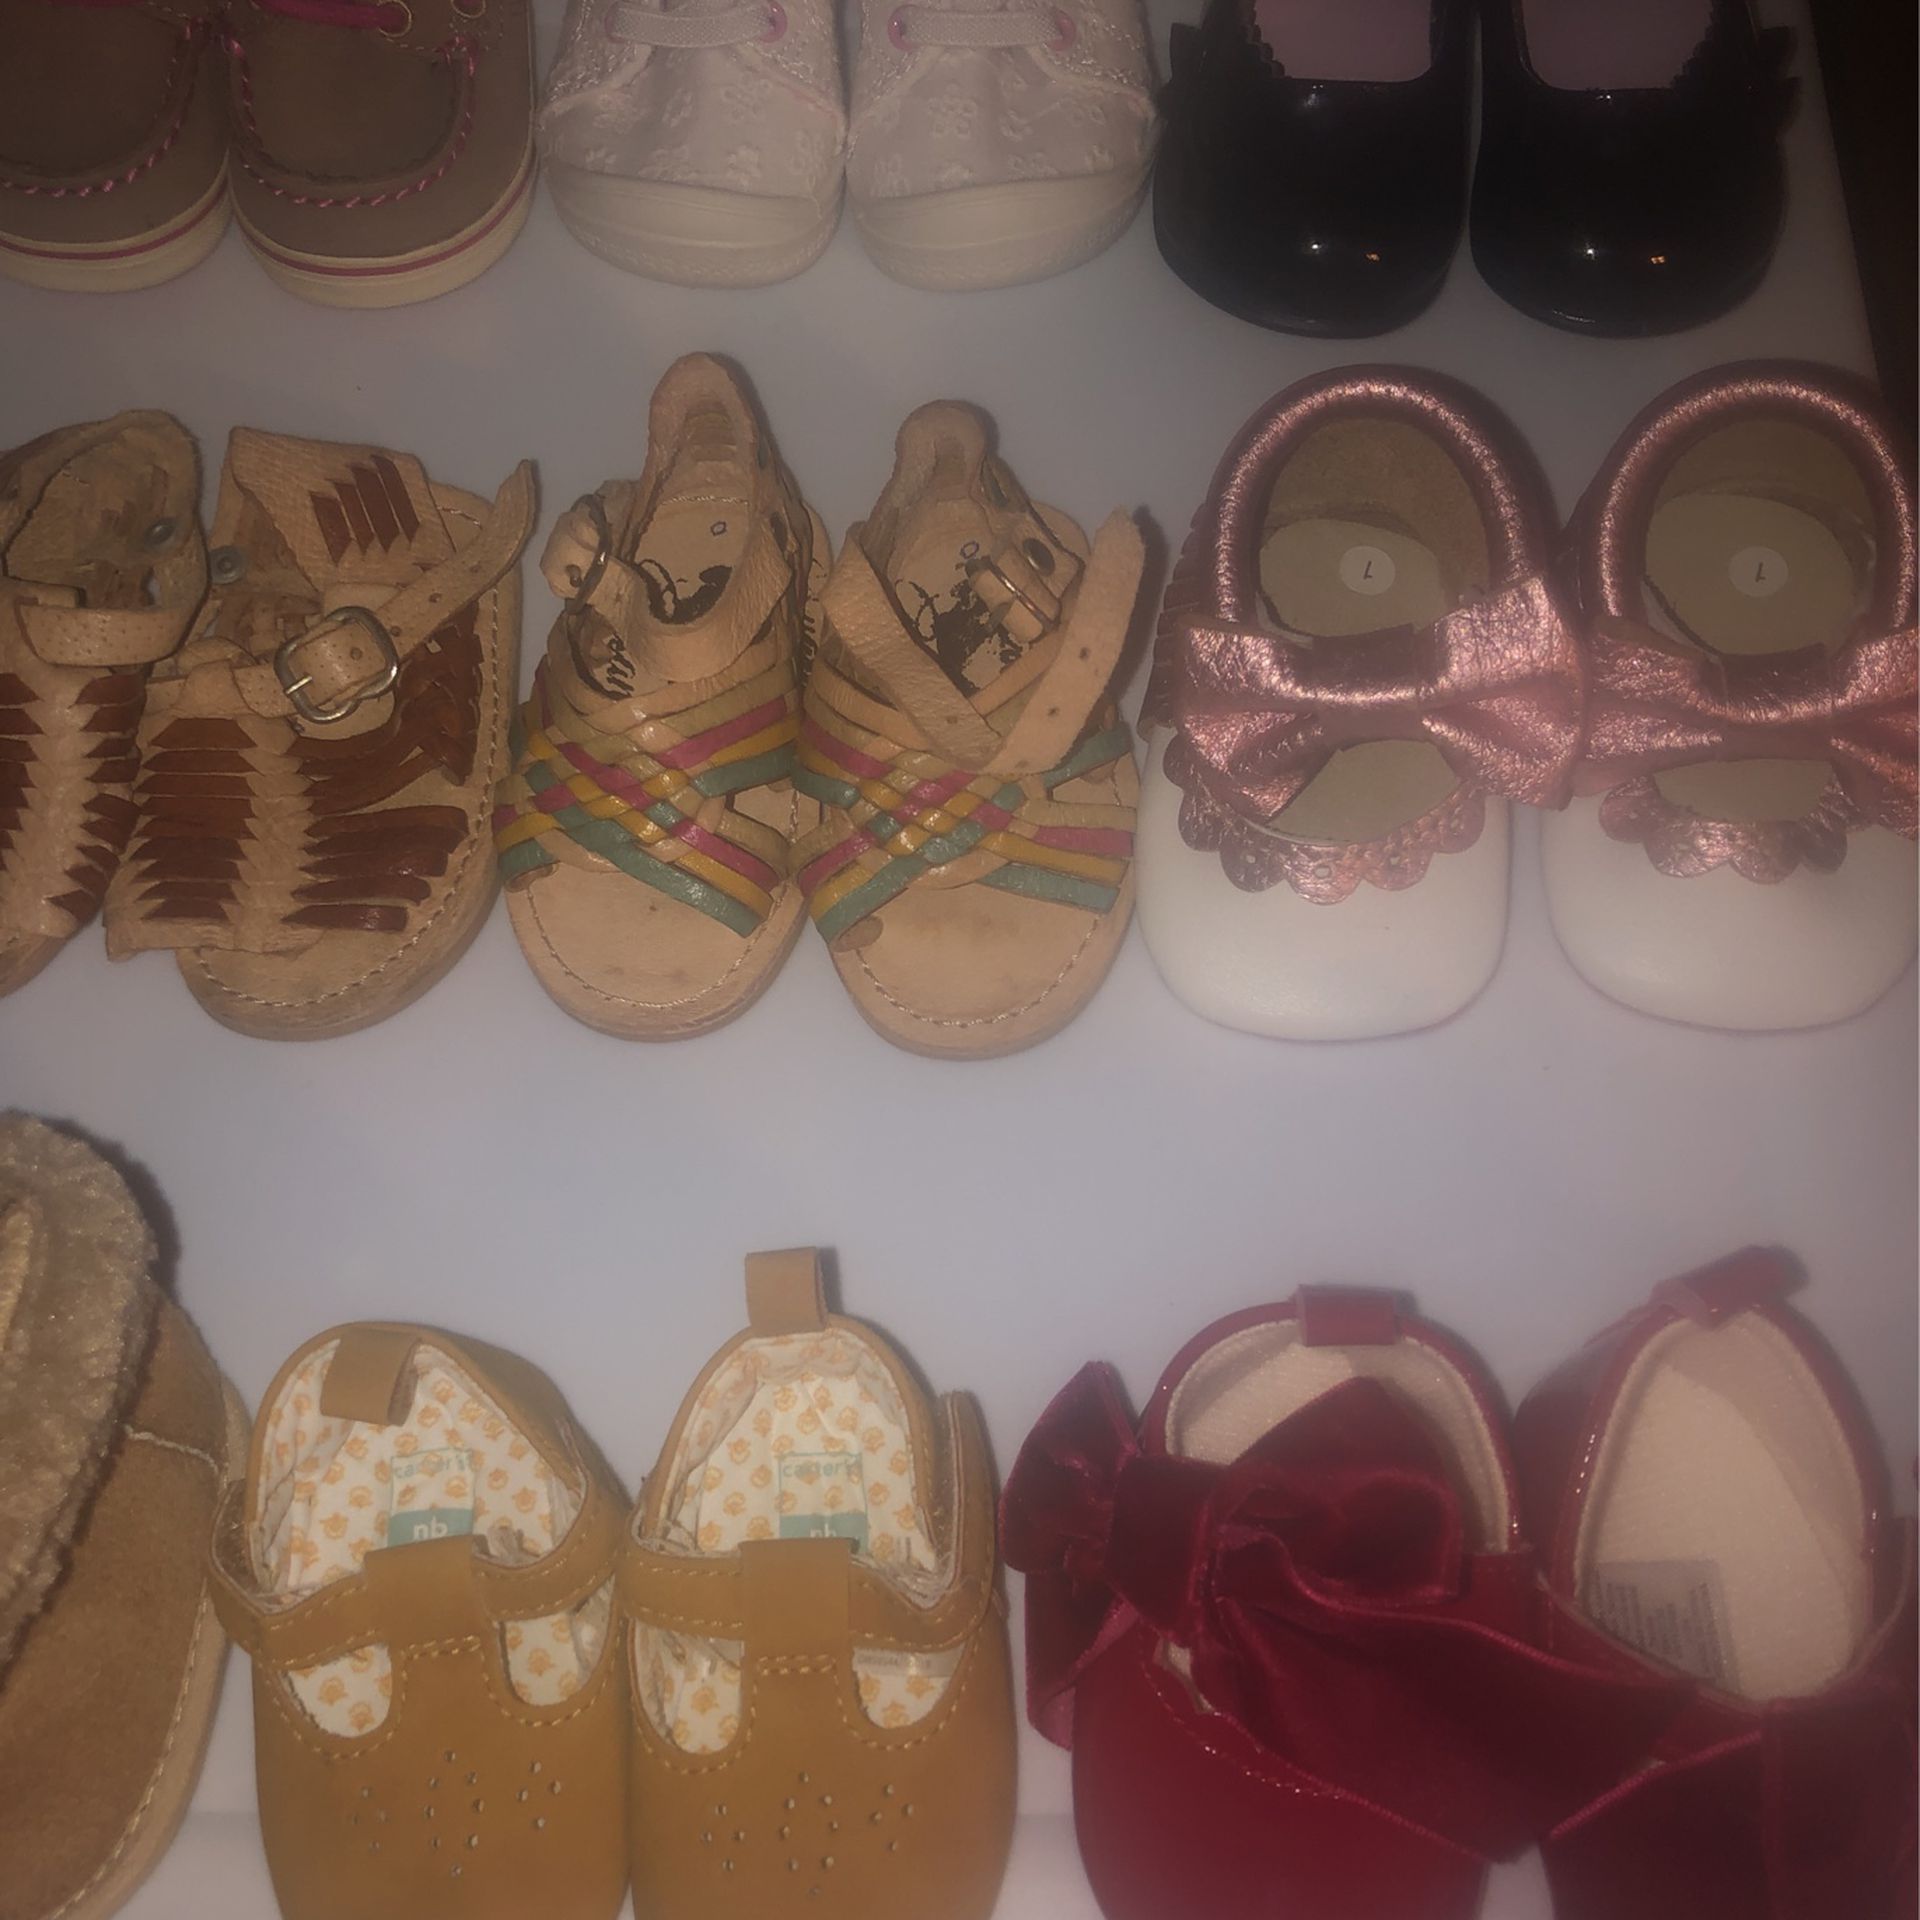 Like New Baby Girl Shoes Take All For $40